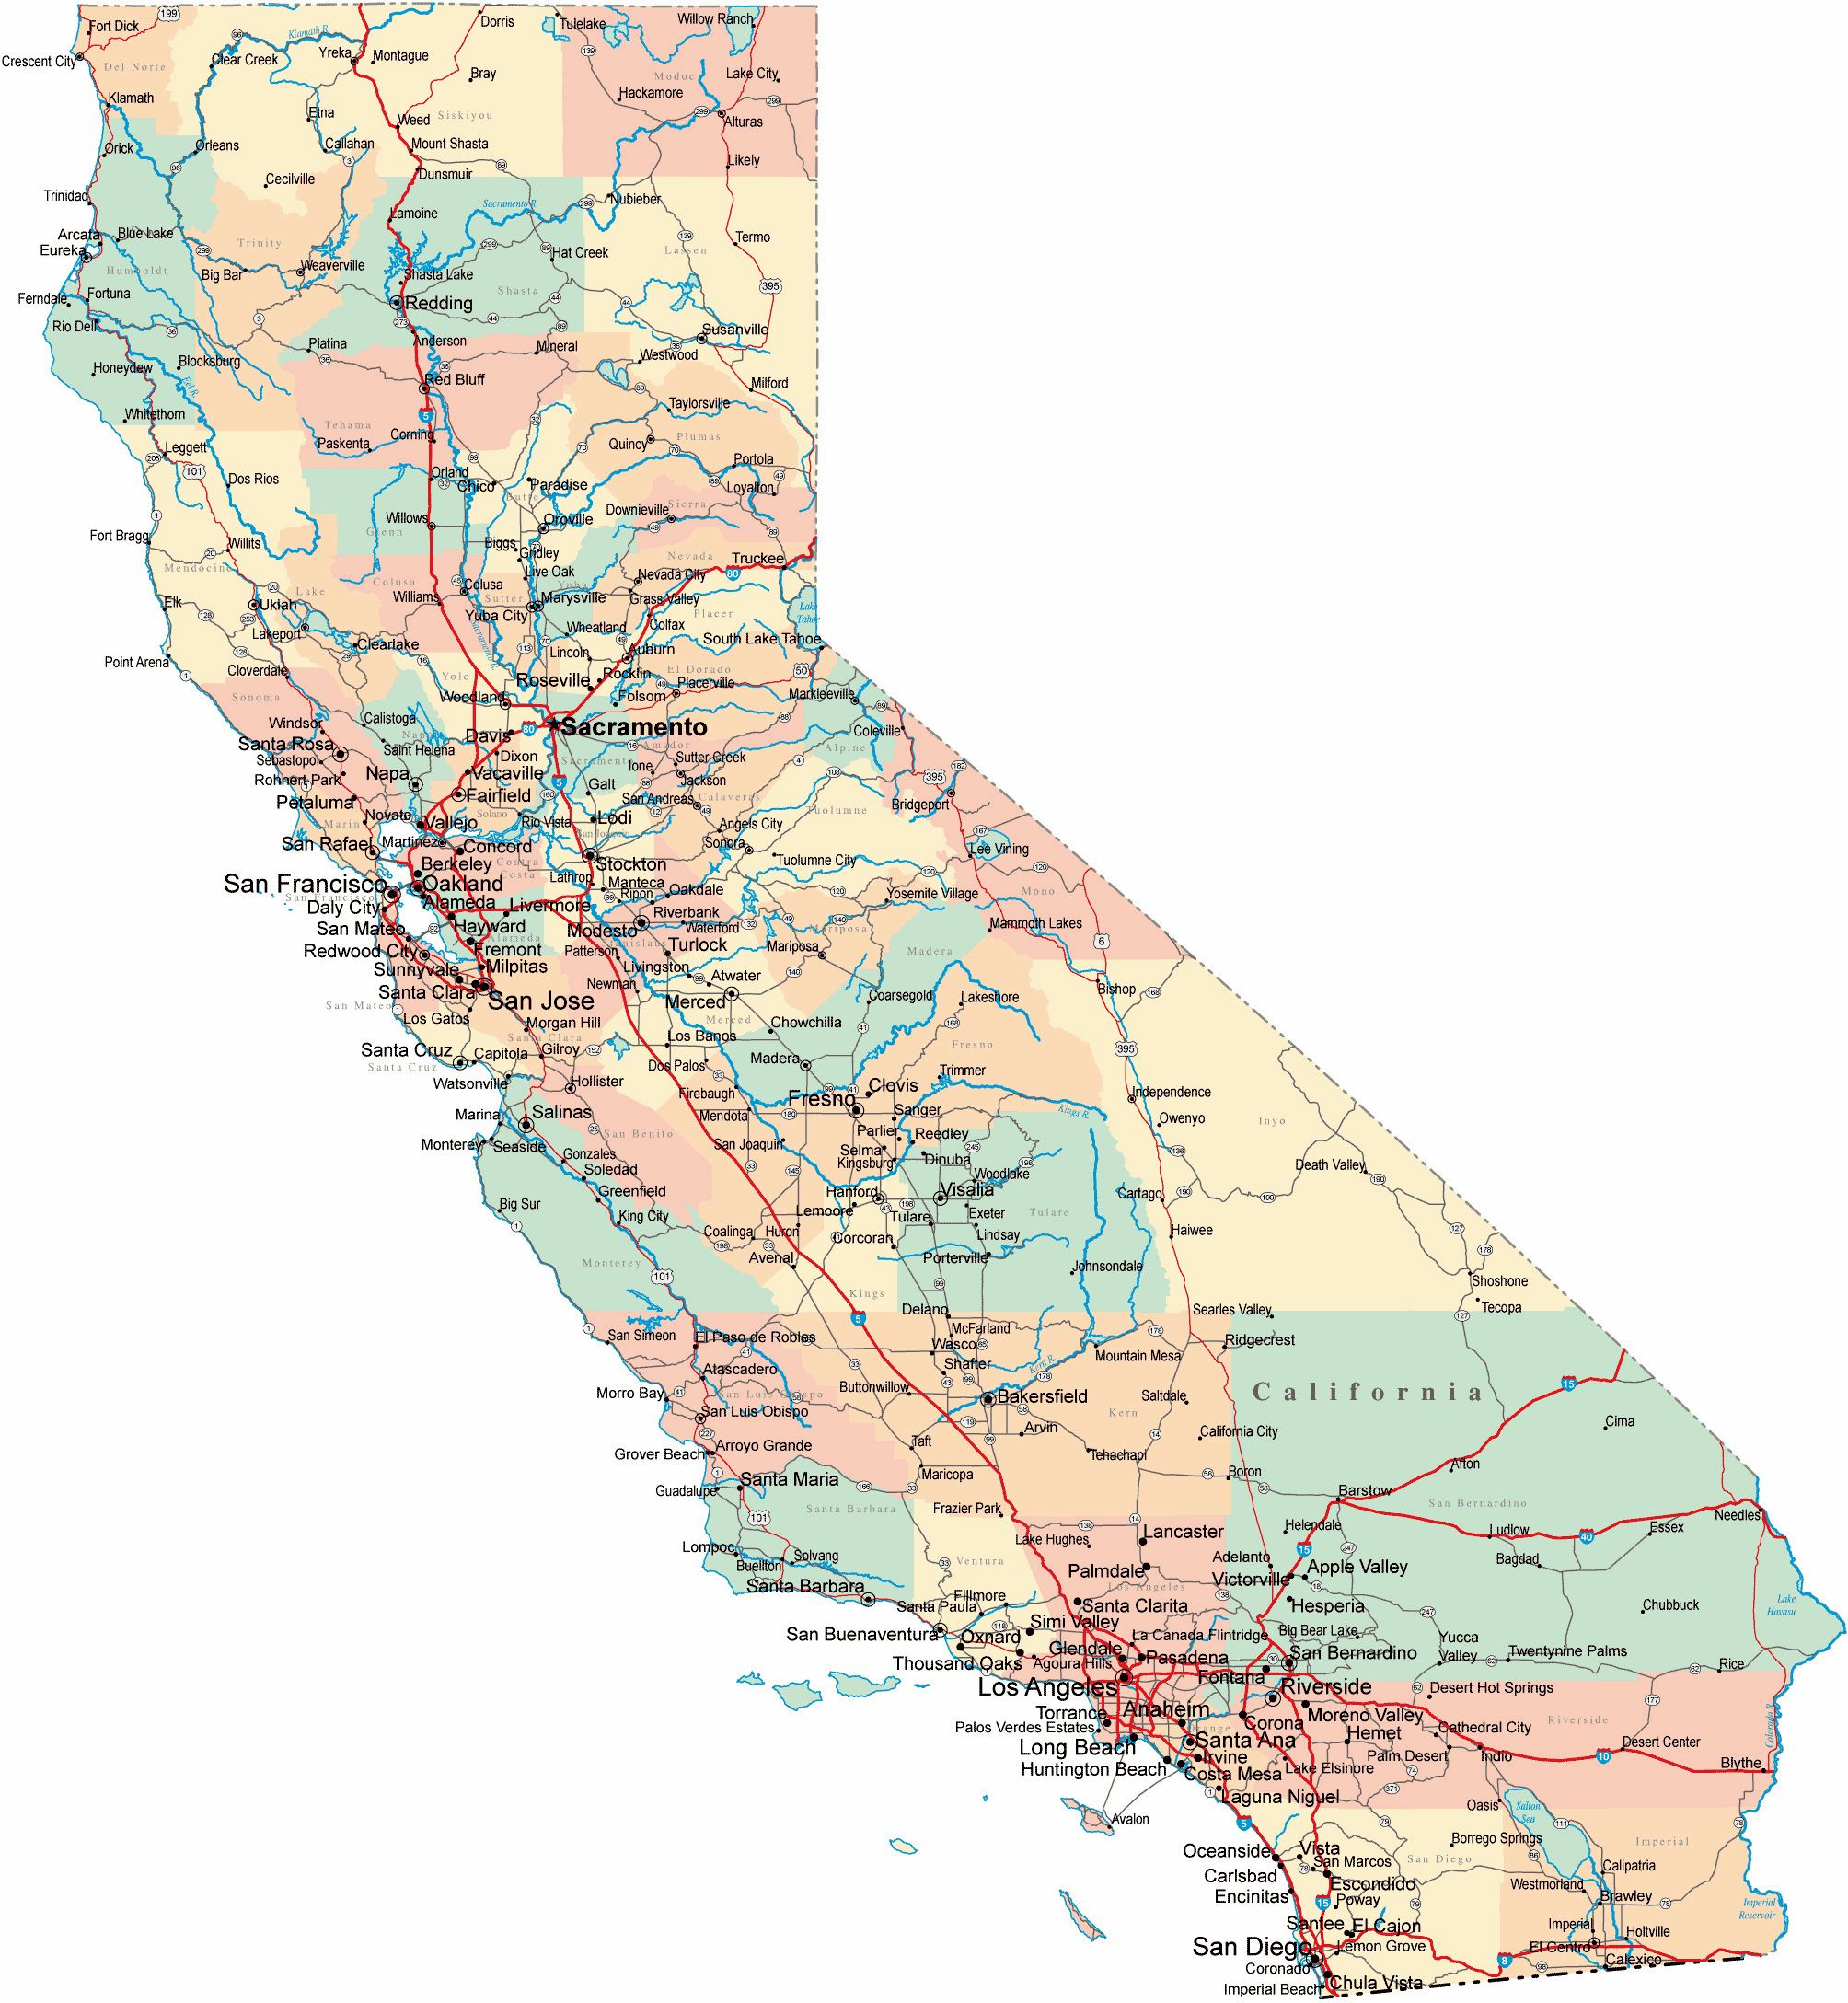 Large California Maps For Free Download And Print | High-Resolution - Driving Map Of California